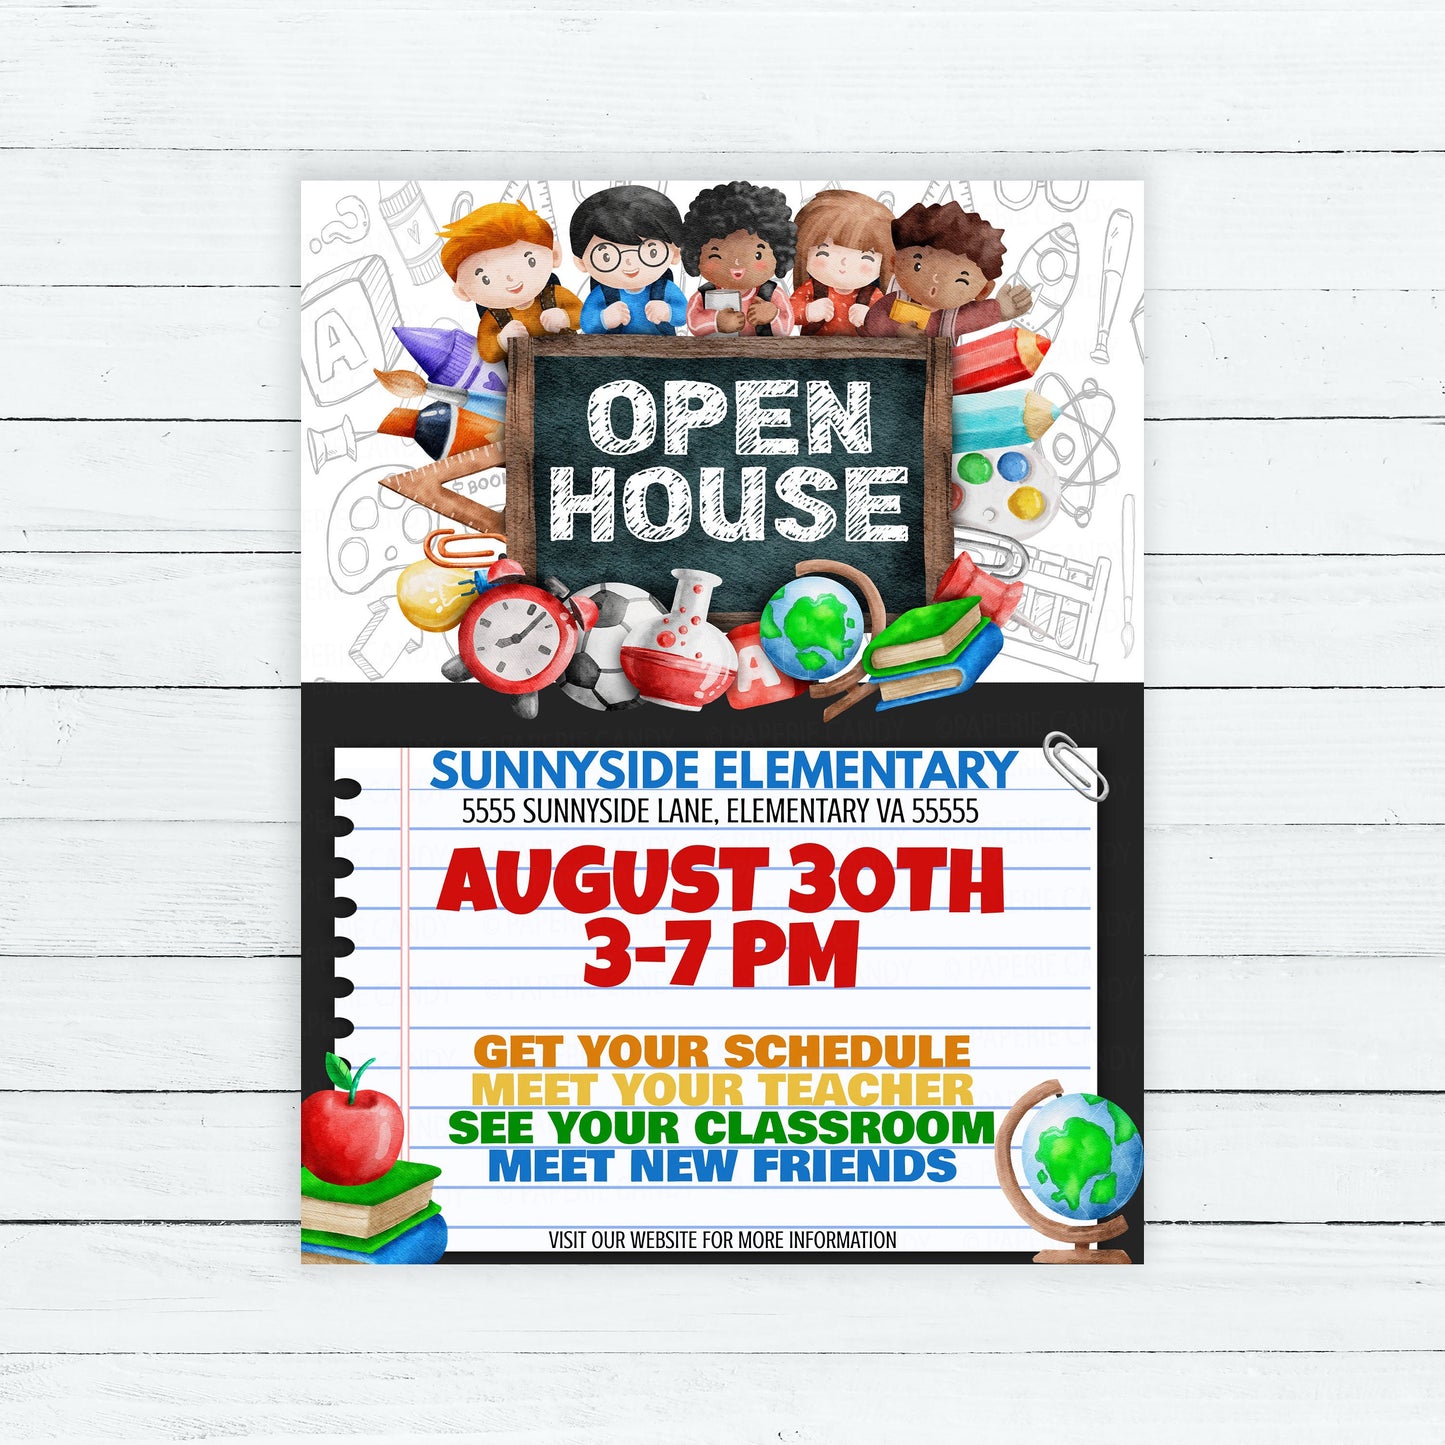 School Open House Flyer, Back To School Meeting, New Students Informational Invitation, PTO PTA Fundraiser, Editable Printable Template